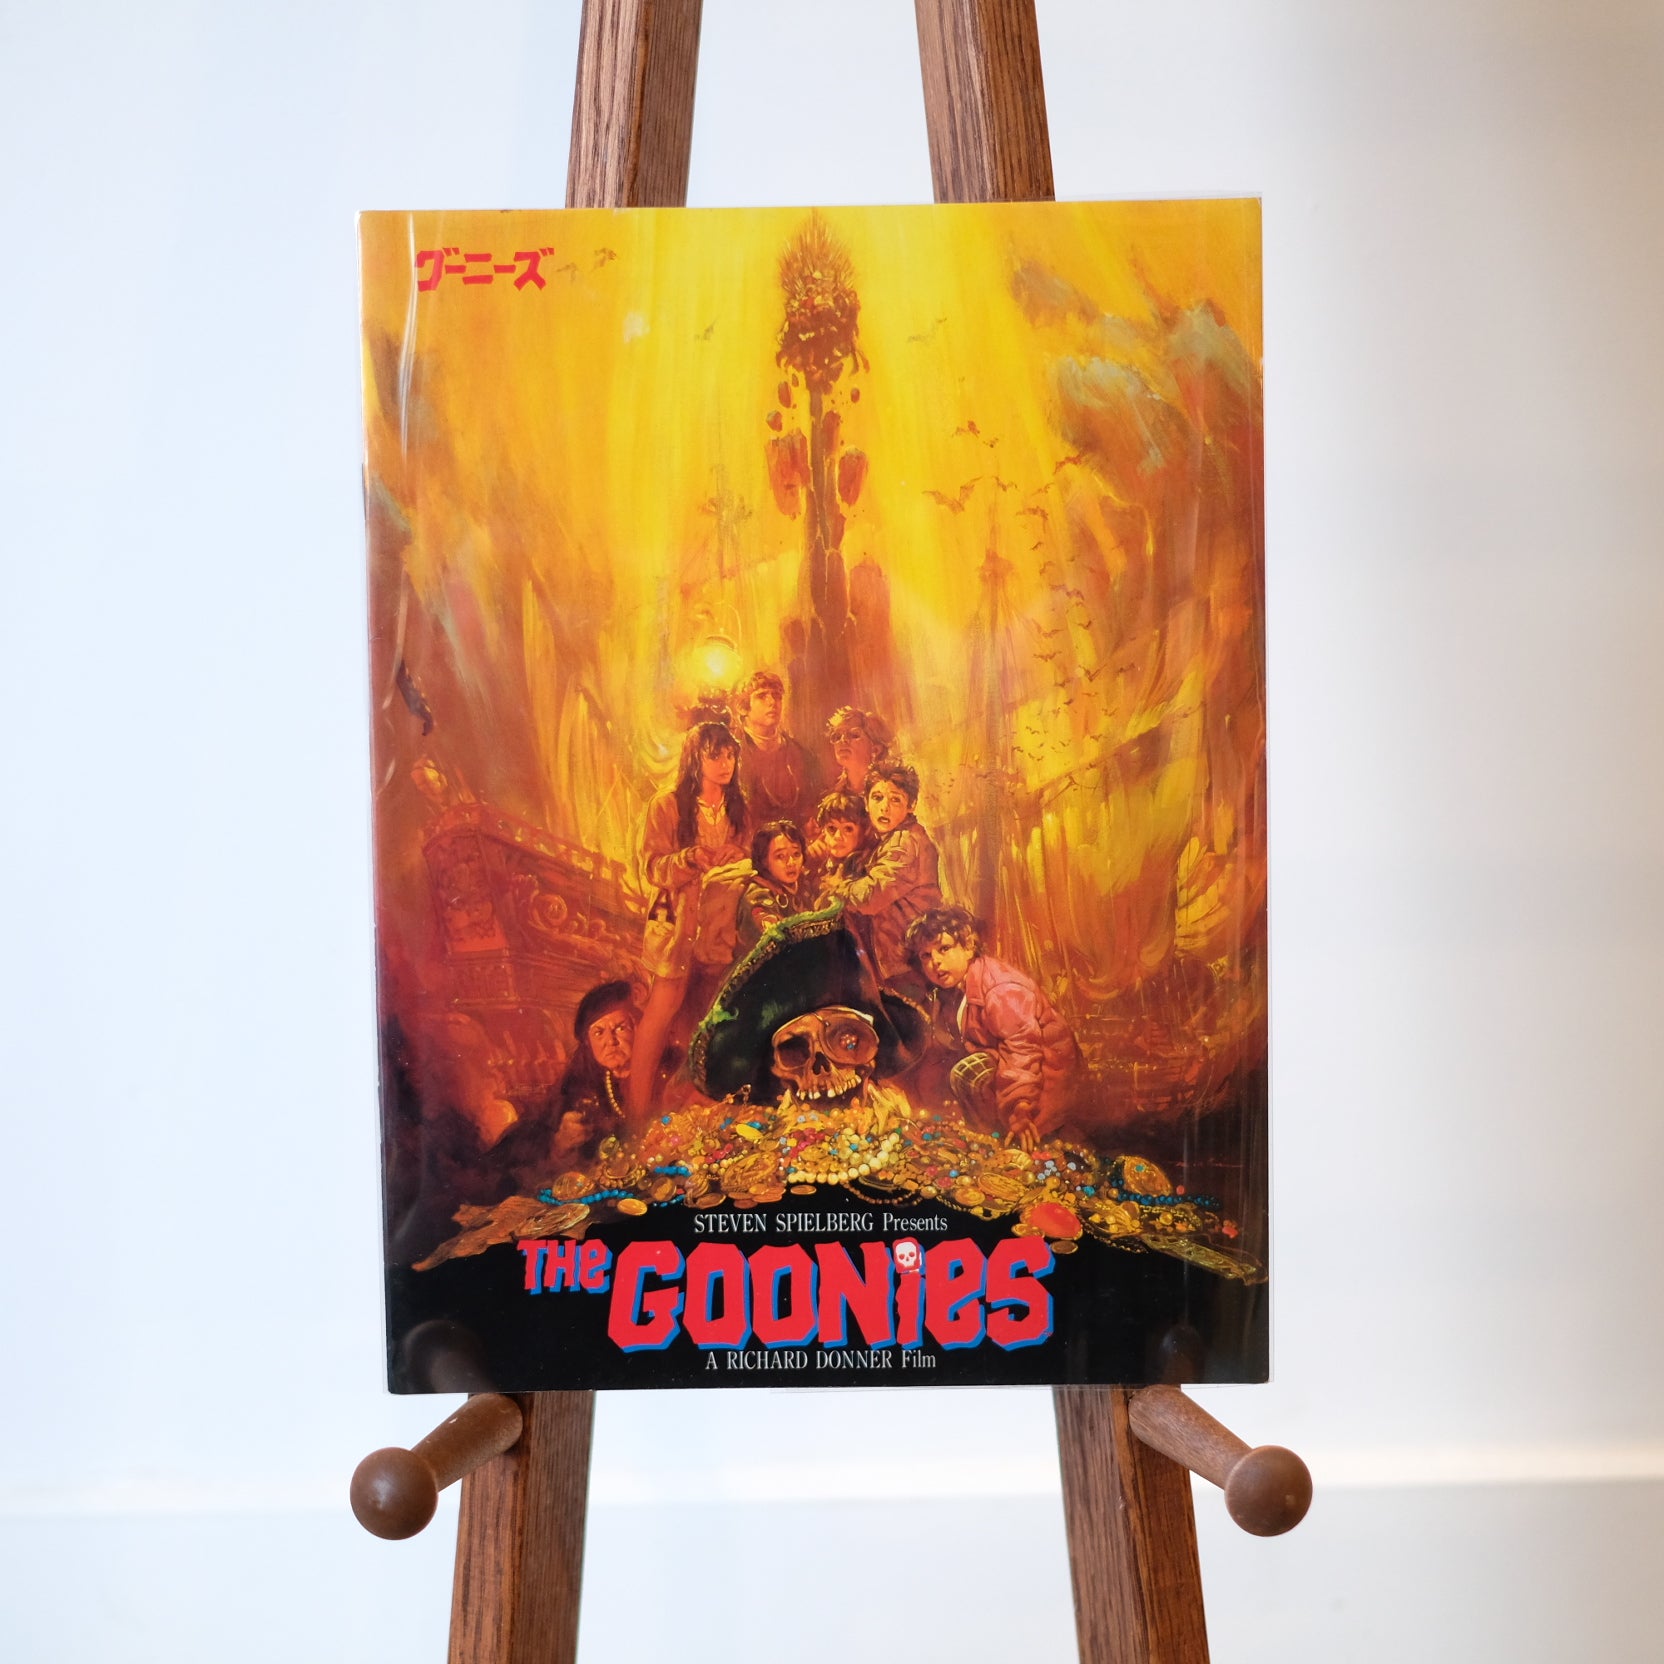 the goonies movie promo book - japanese edition